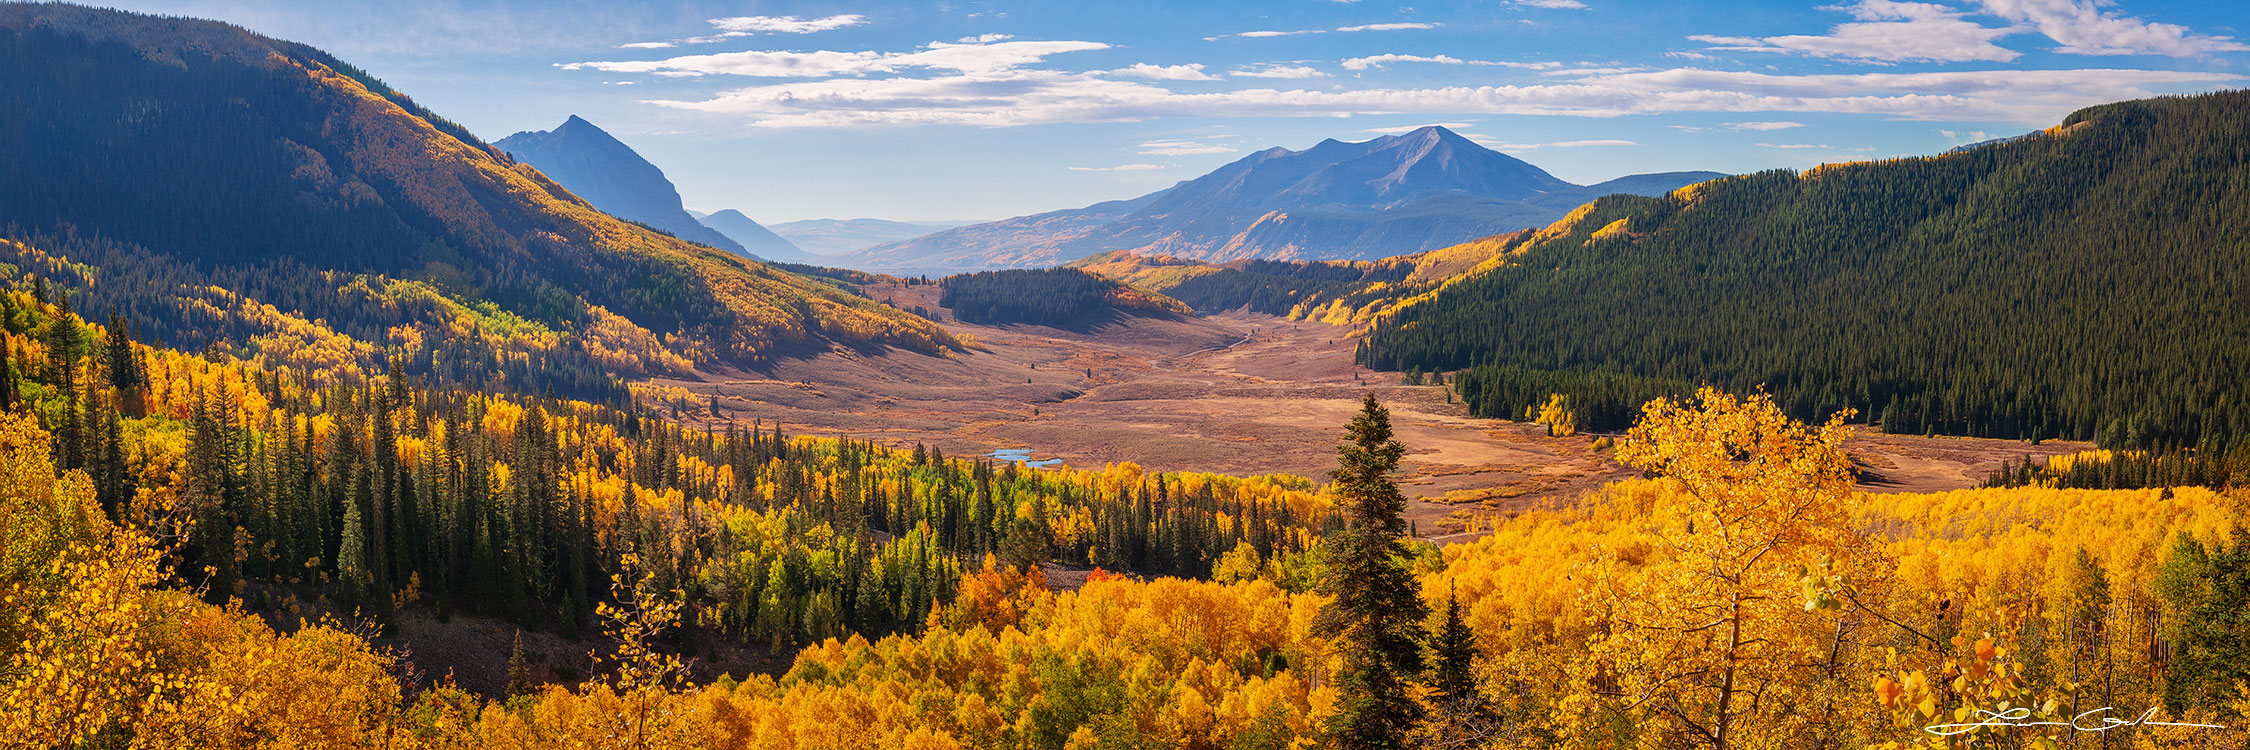 Panoramic view of vibrant Crested Butte fall colors in a Colorado mountain valley, showcasing golden aspen trees and evergreen forests under late morning sunlight. - Gintchin Fine Art